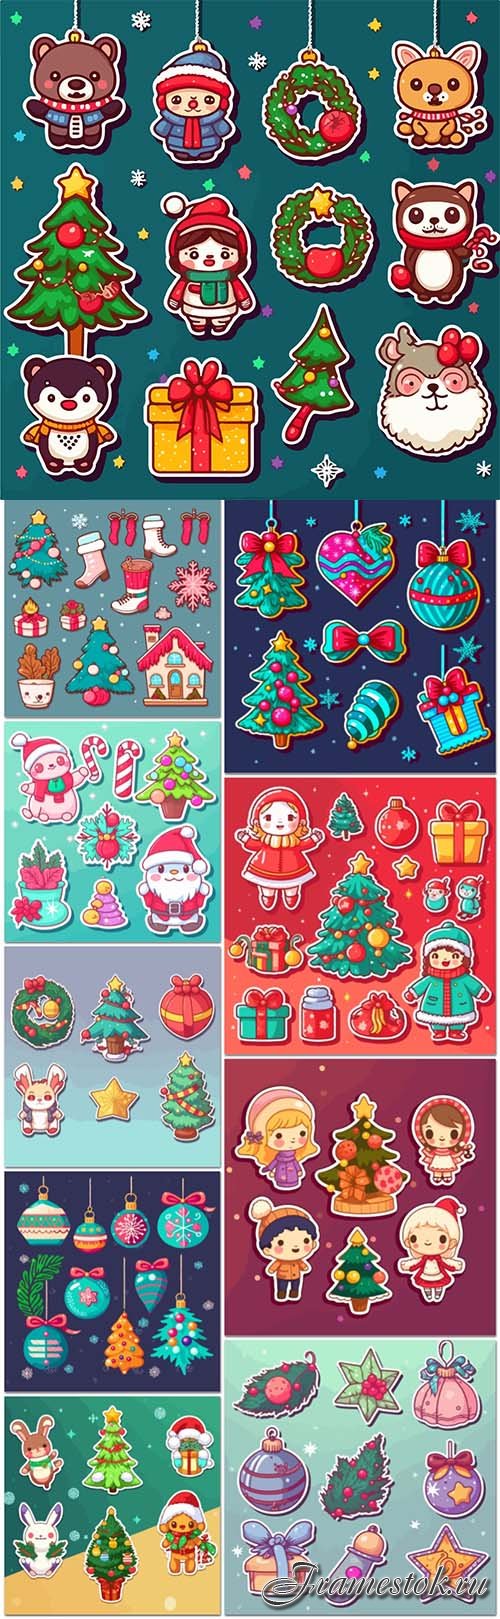 Sticker set xmas, attribute ornament, sticker collection new year holidays